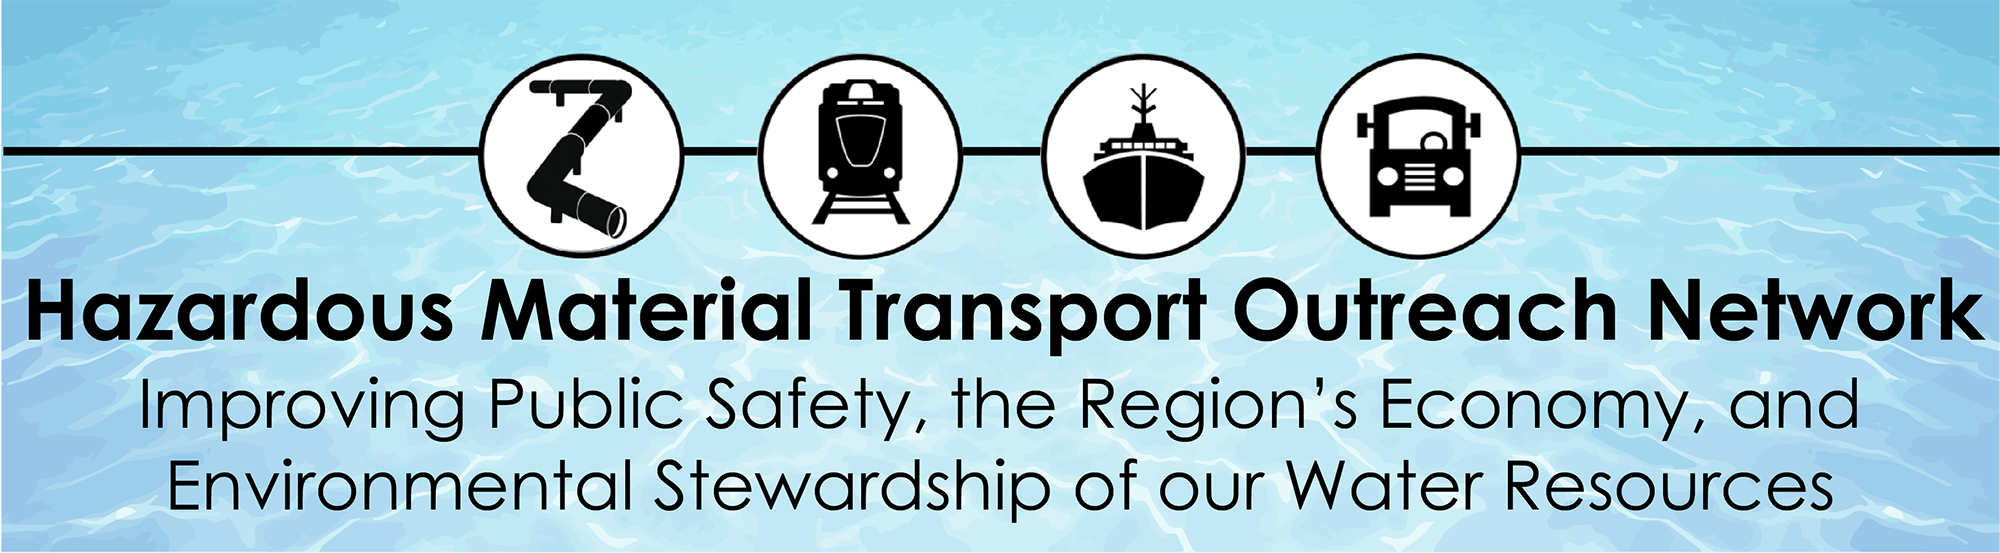 hazardous materials transport outreach network. Improving public safety, the region's economy, and environmental stewardship of our water resources. 